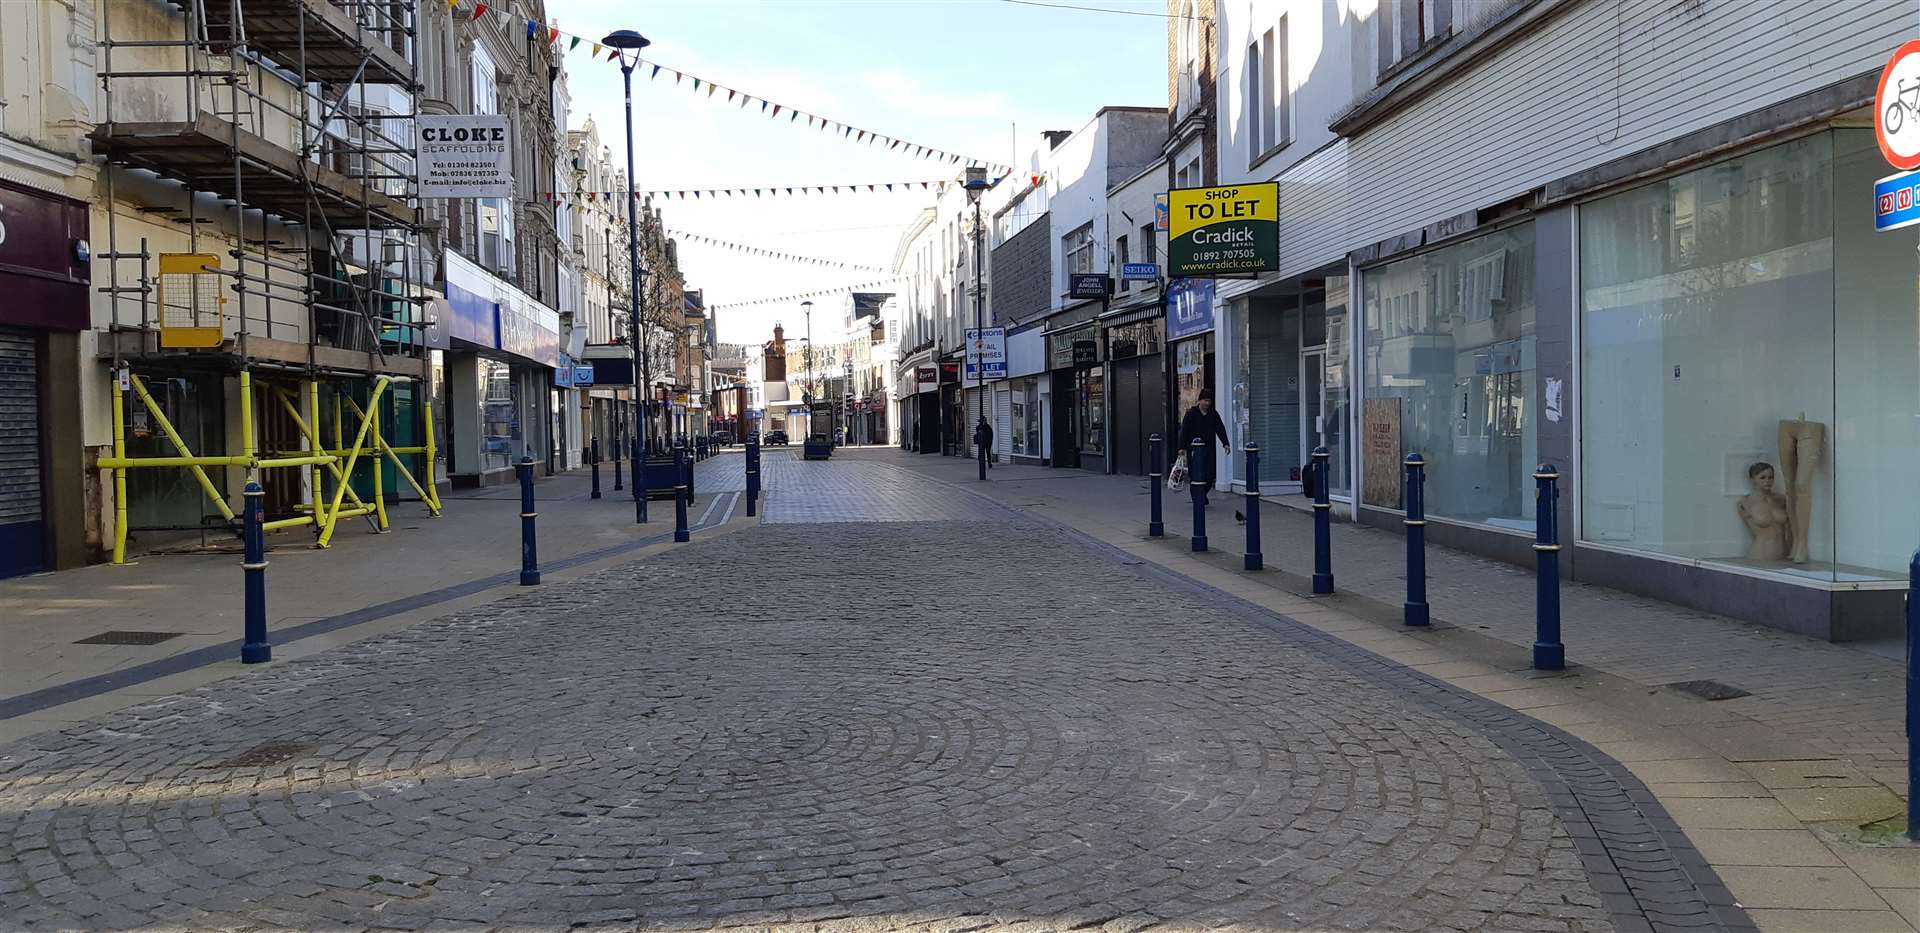 High street life was also changed by coronavirus. Dover's Biggin Street precinct deserted just after the first lockdown, March 2020